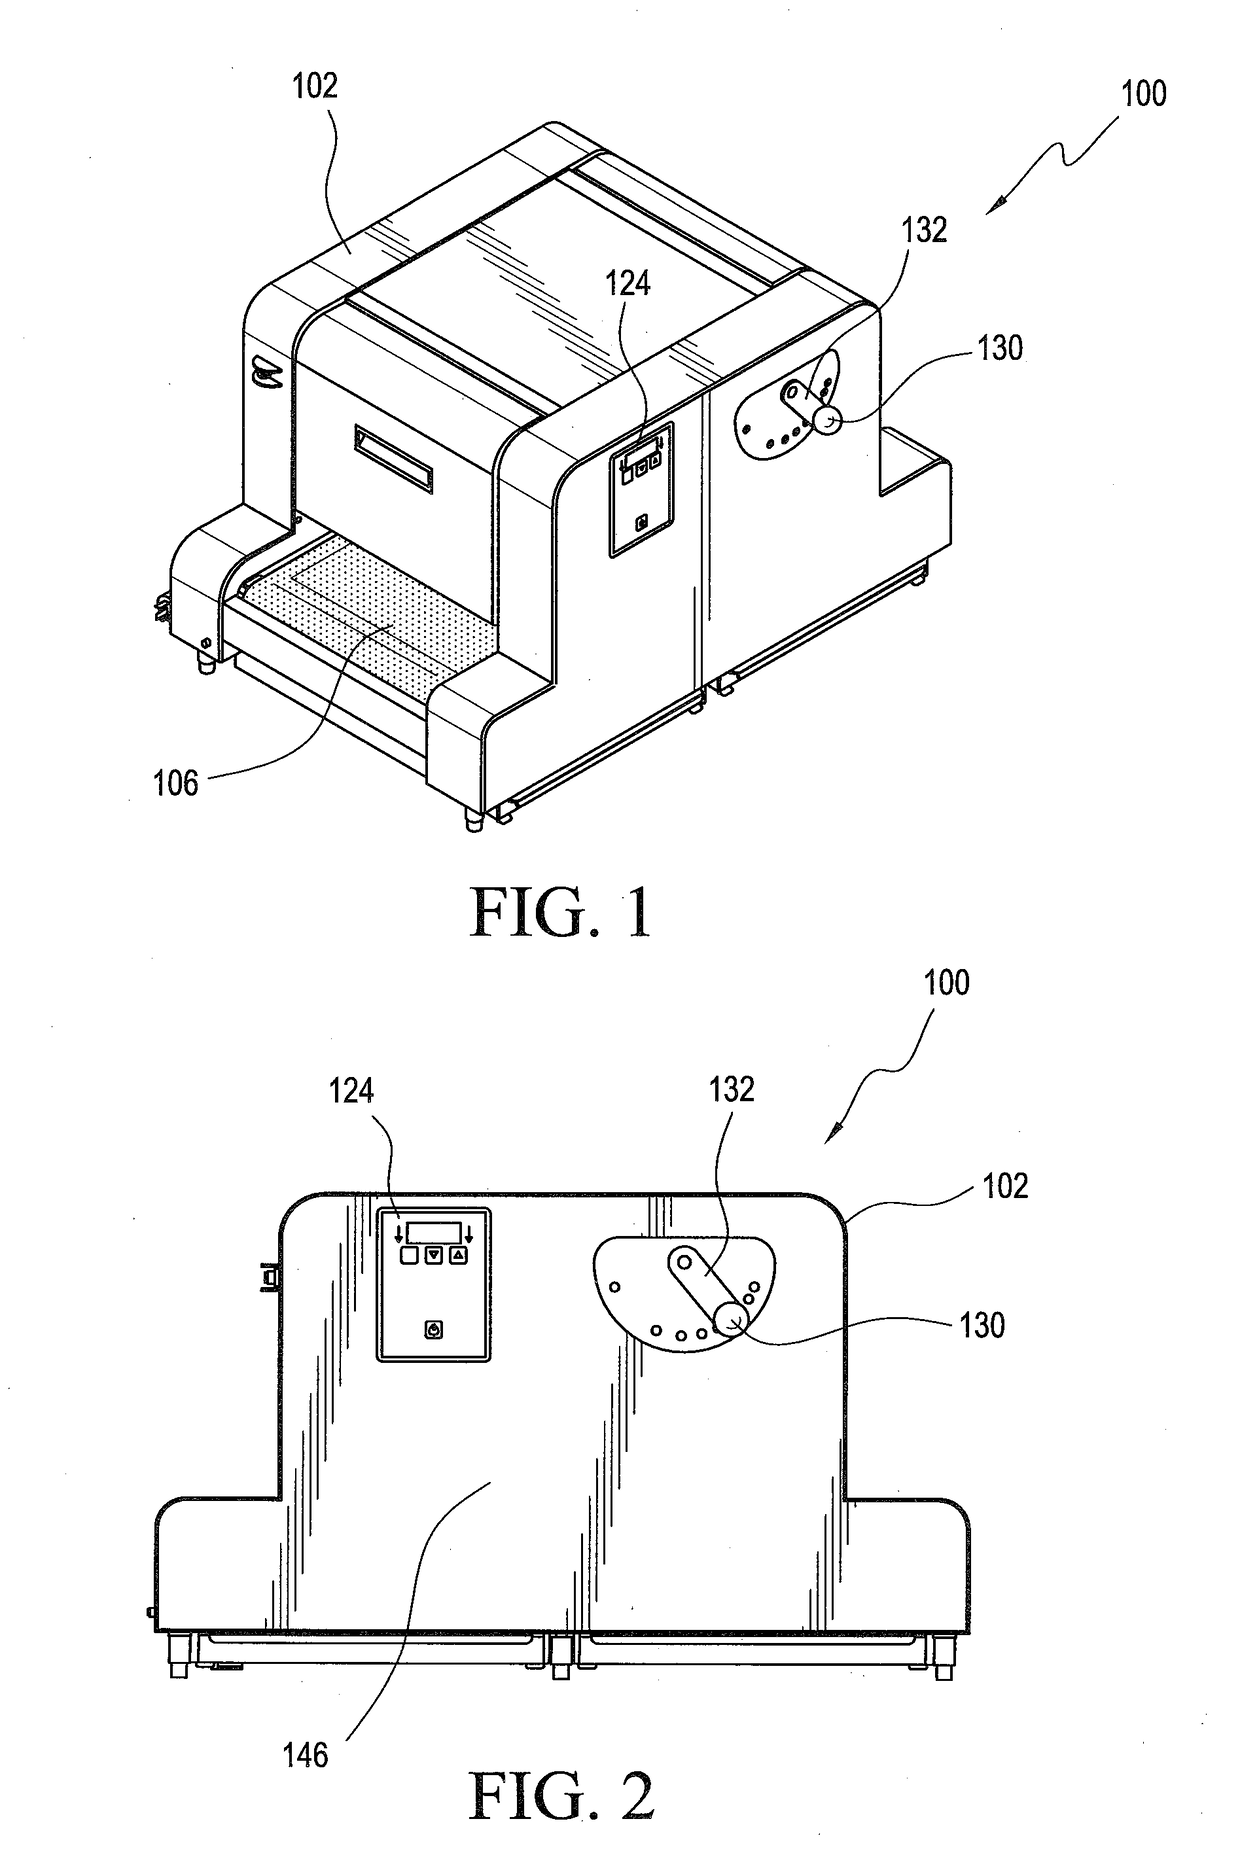 Conveyor-type grilling appliance for cooking or re-thermalizing food with multiple independently controlled sets of conveyors defining multiple independently controlled cooking lanes